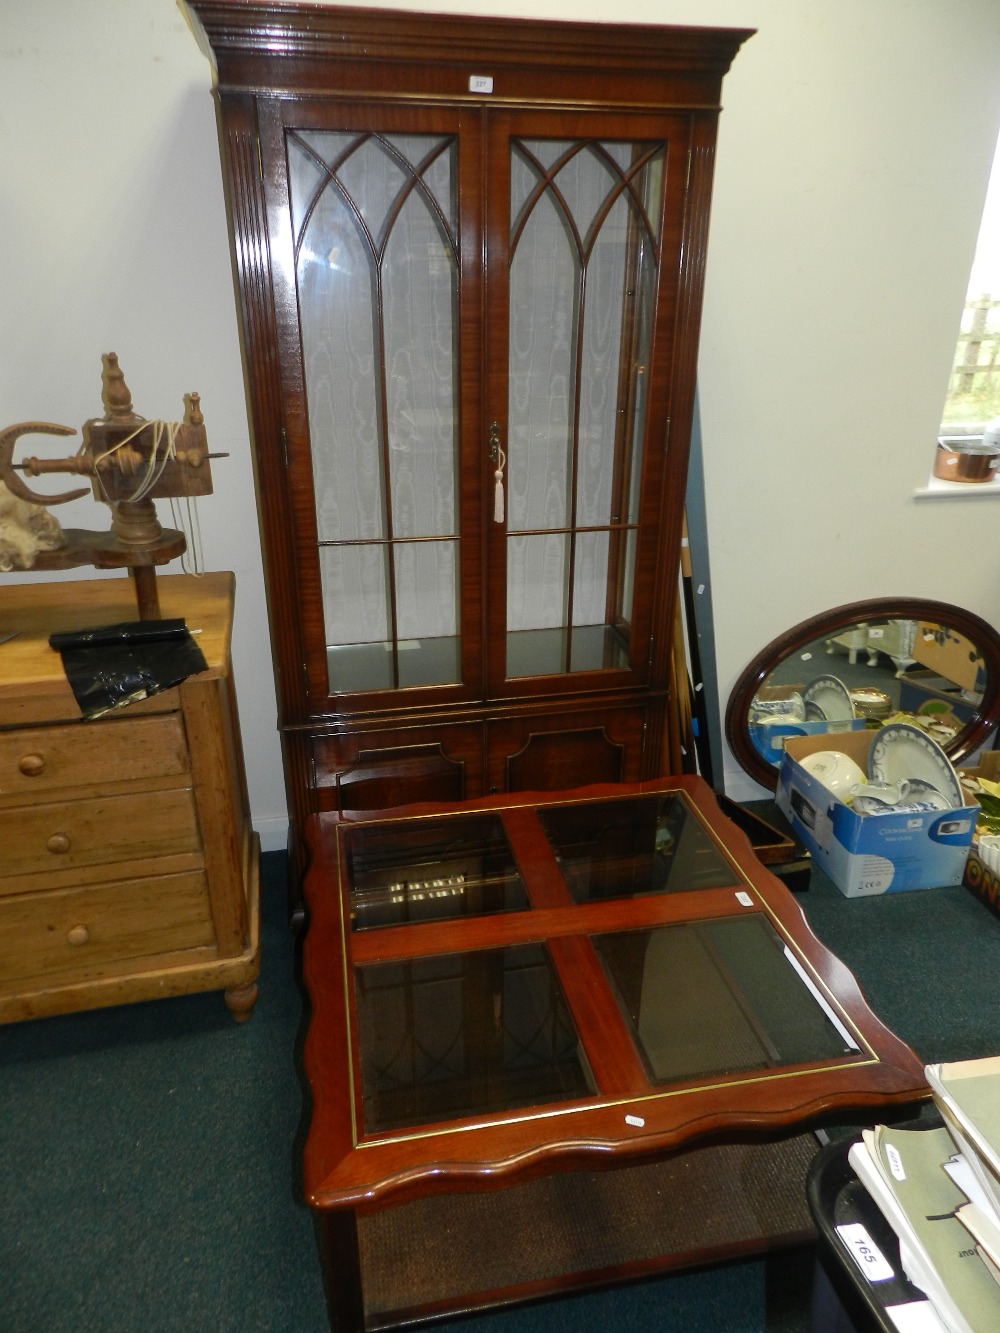 A modern floor standing high china display cabinet with gothic arched glazing bars along with a